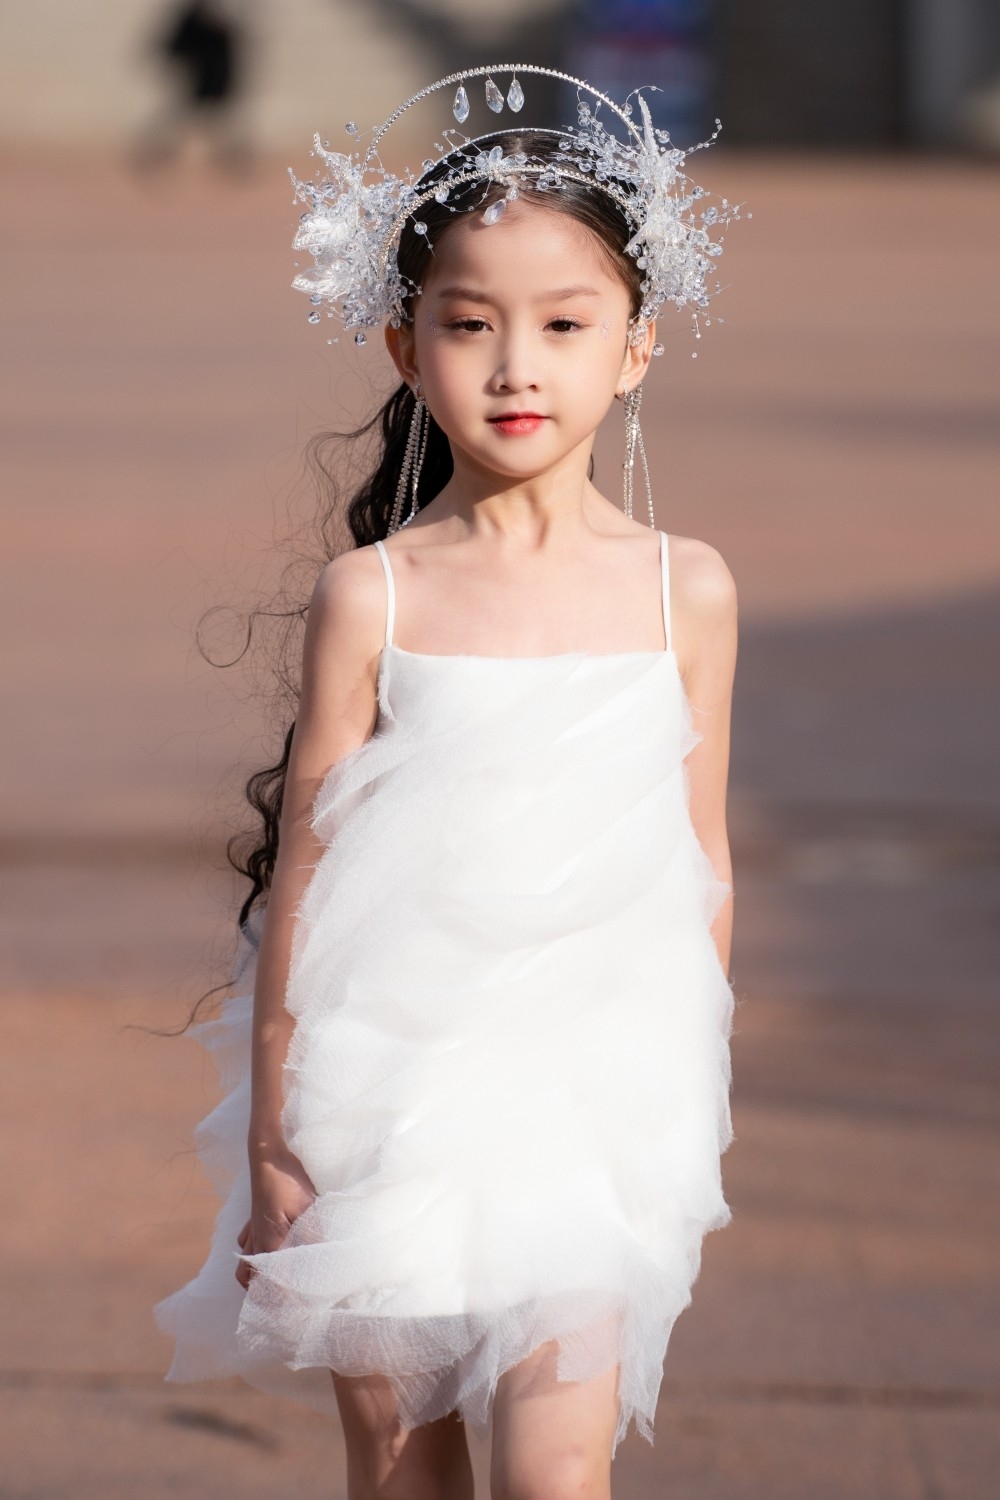 local models join asian kids fashion week in rok picture 5